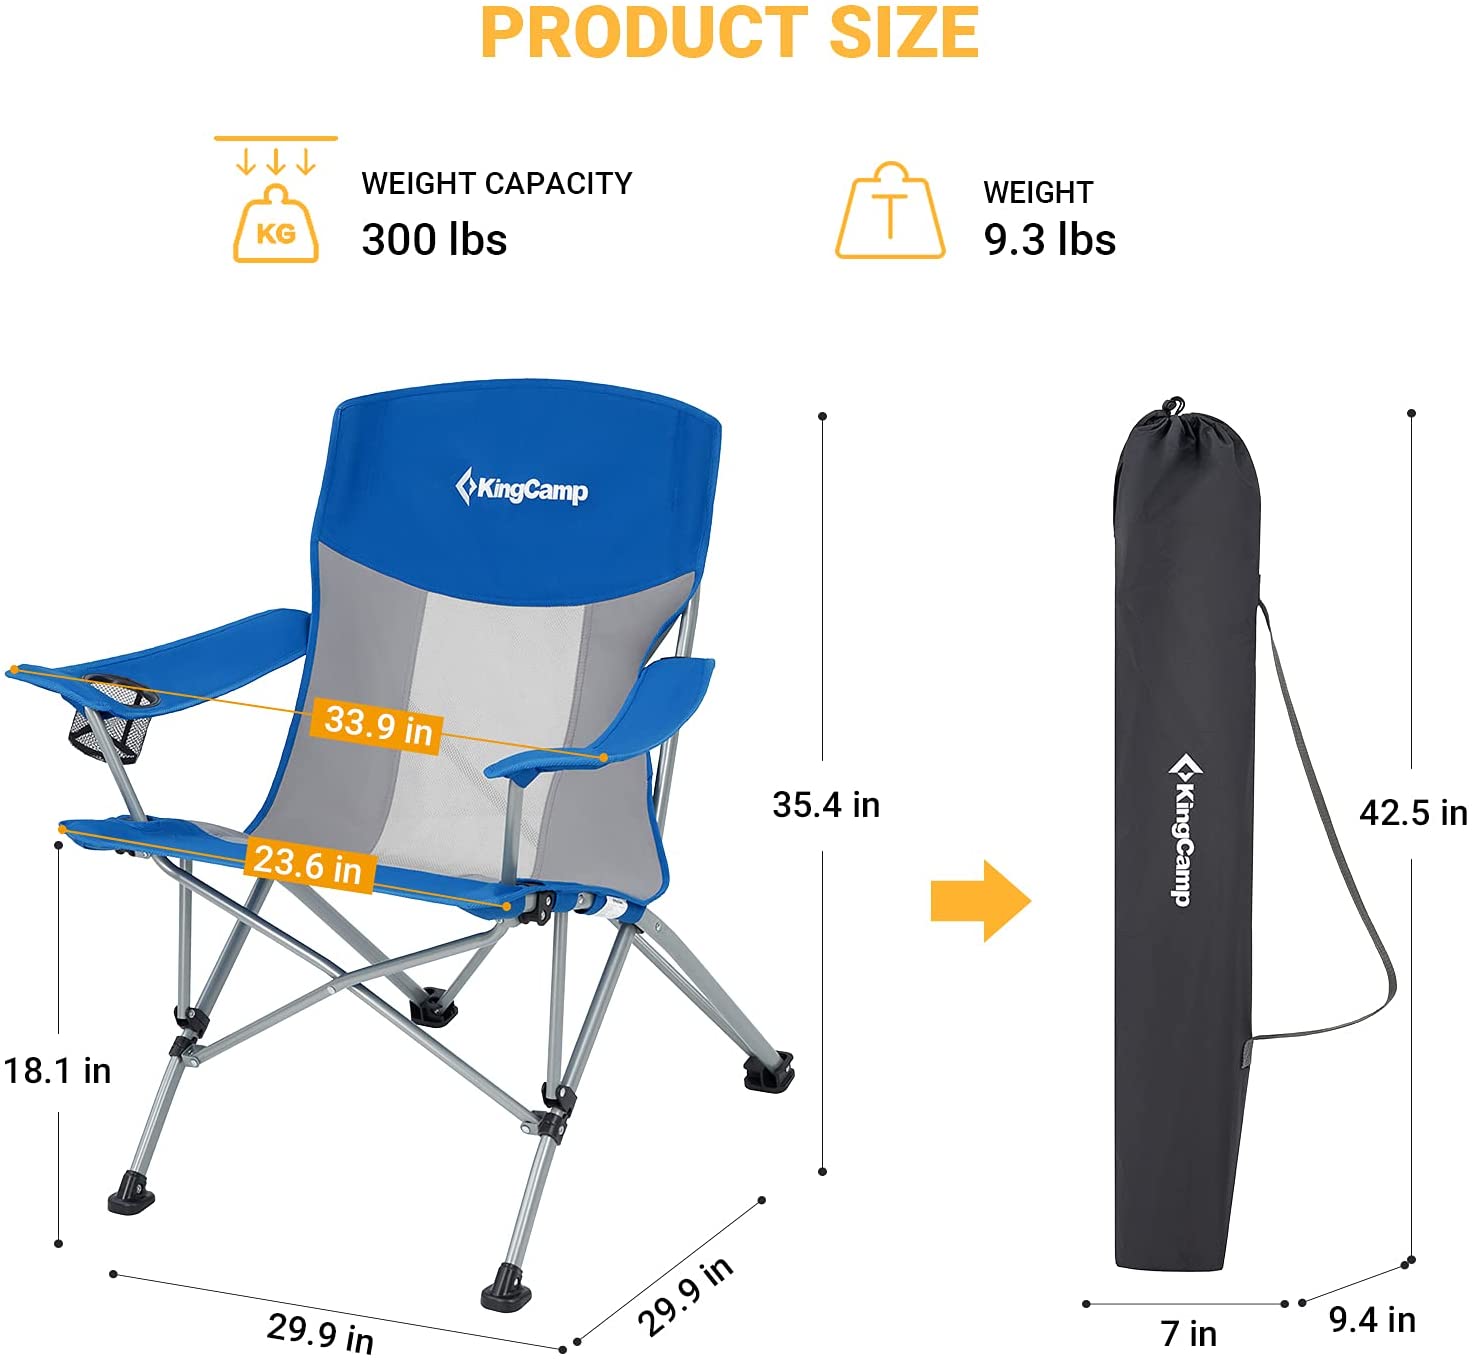 KingCamp Mesh Oversized Camping Chair